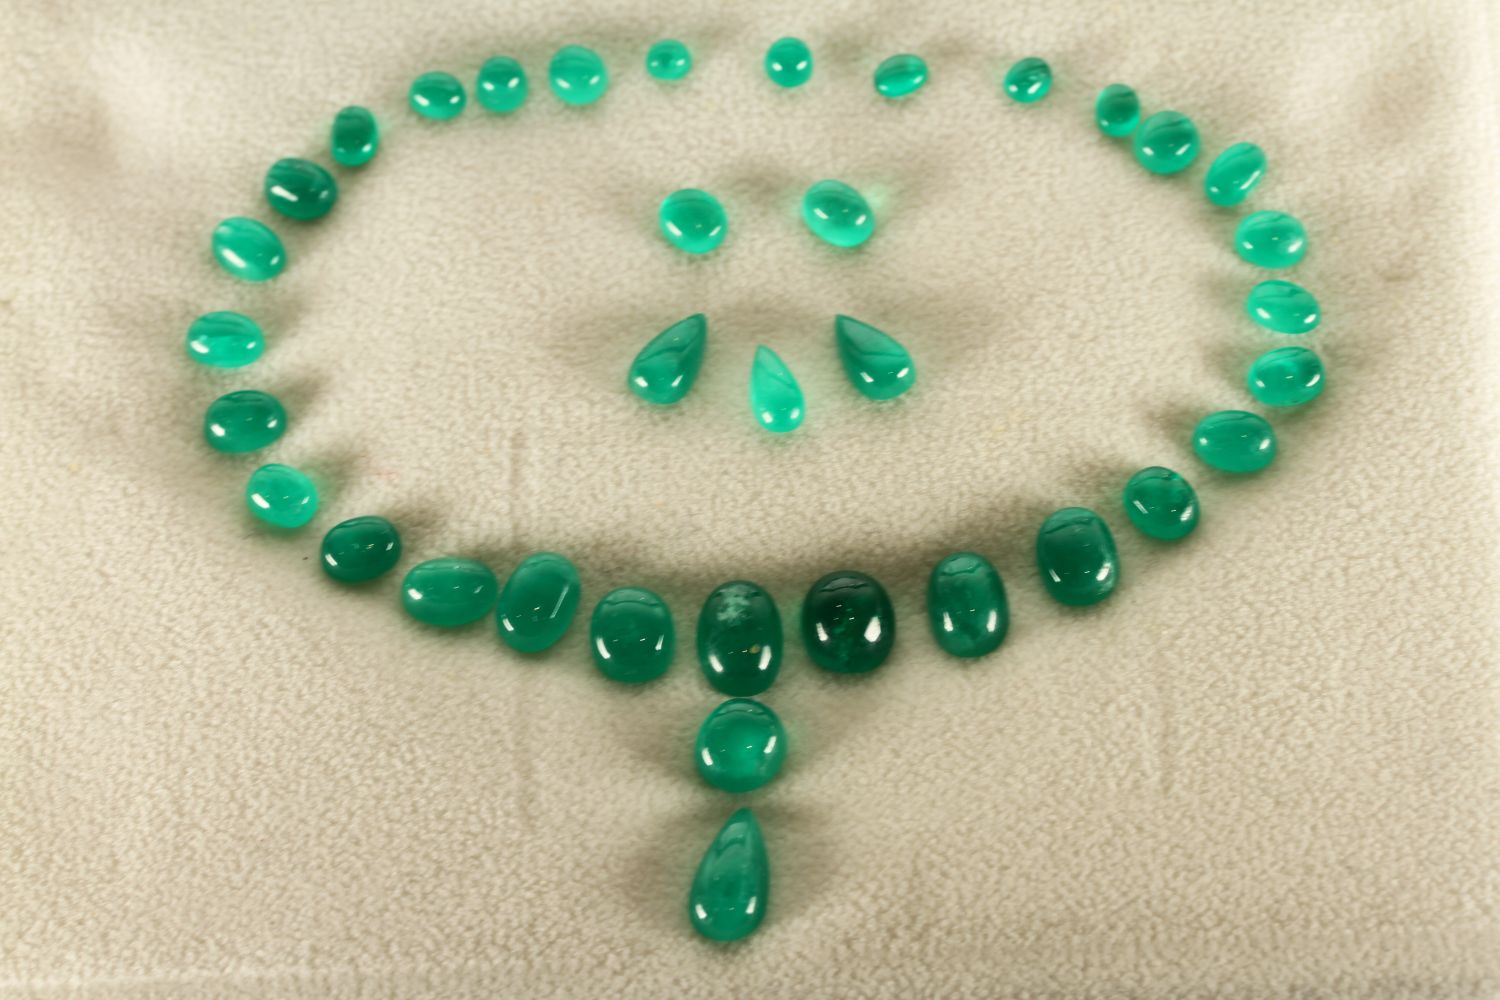 A Loose Set of Cabochon Emerald Stones, arranged as a graduating riviere with pear cabochon cut